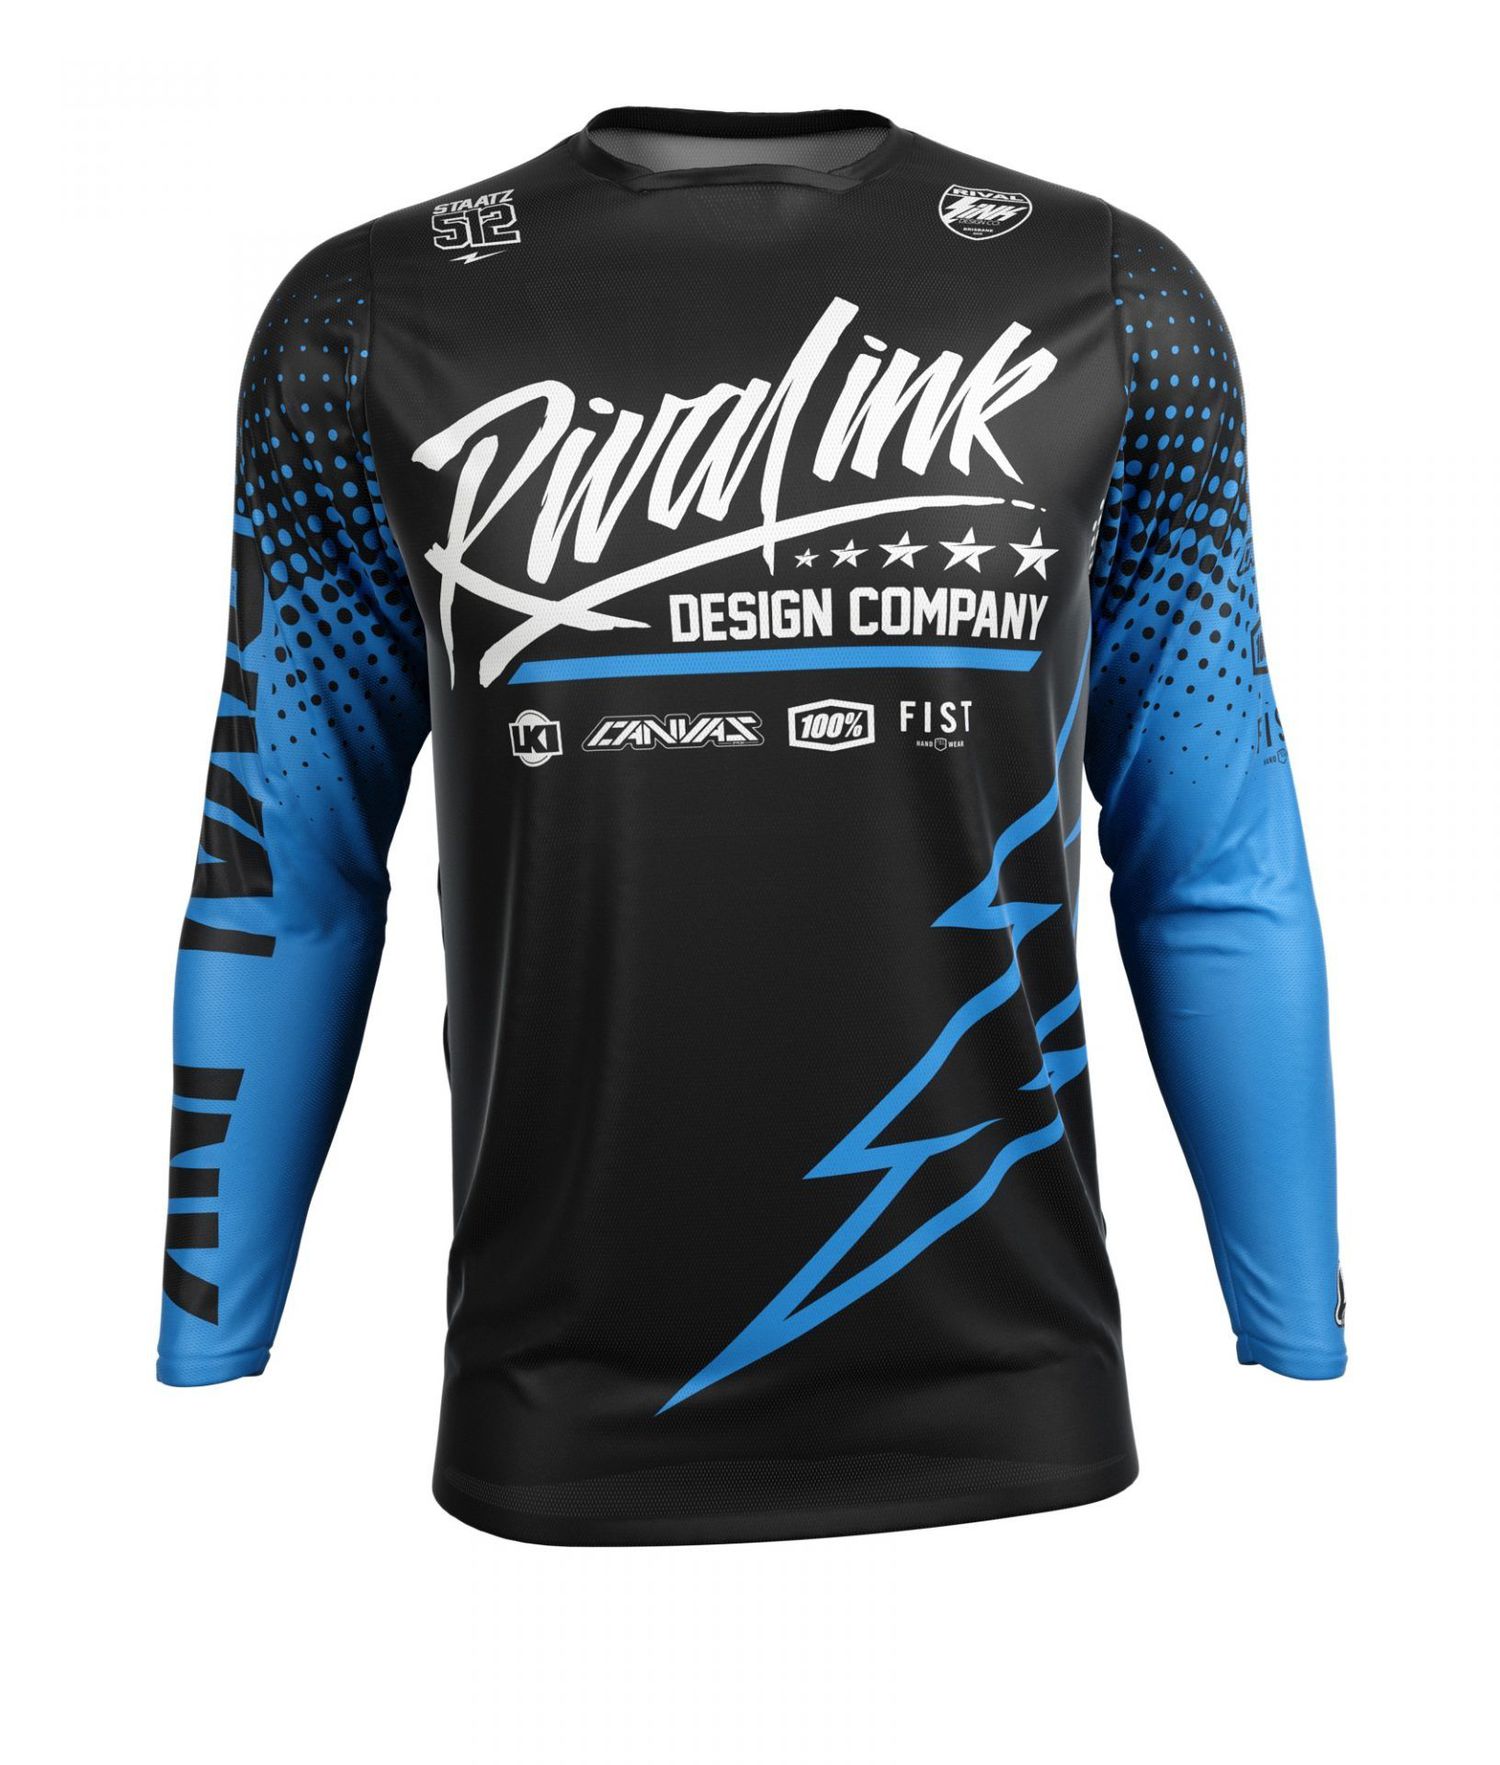 PREMIUM FIT CUSTOM SUBLIMATED JERSEY – SERIES 1 CYAN – Rival Ink Design Co